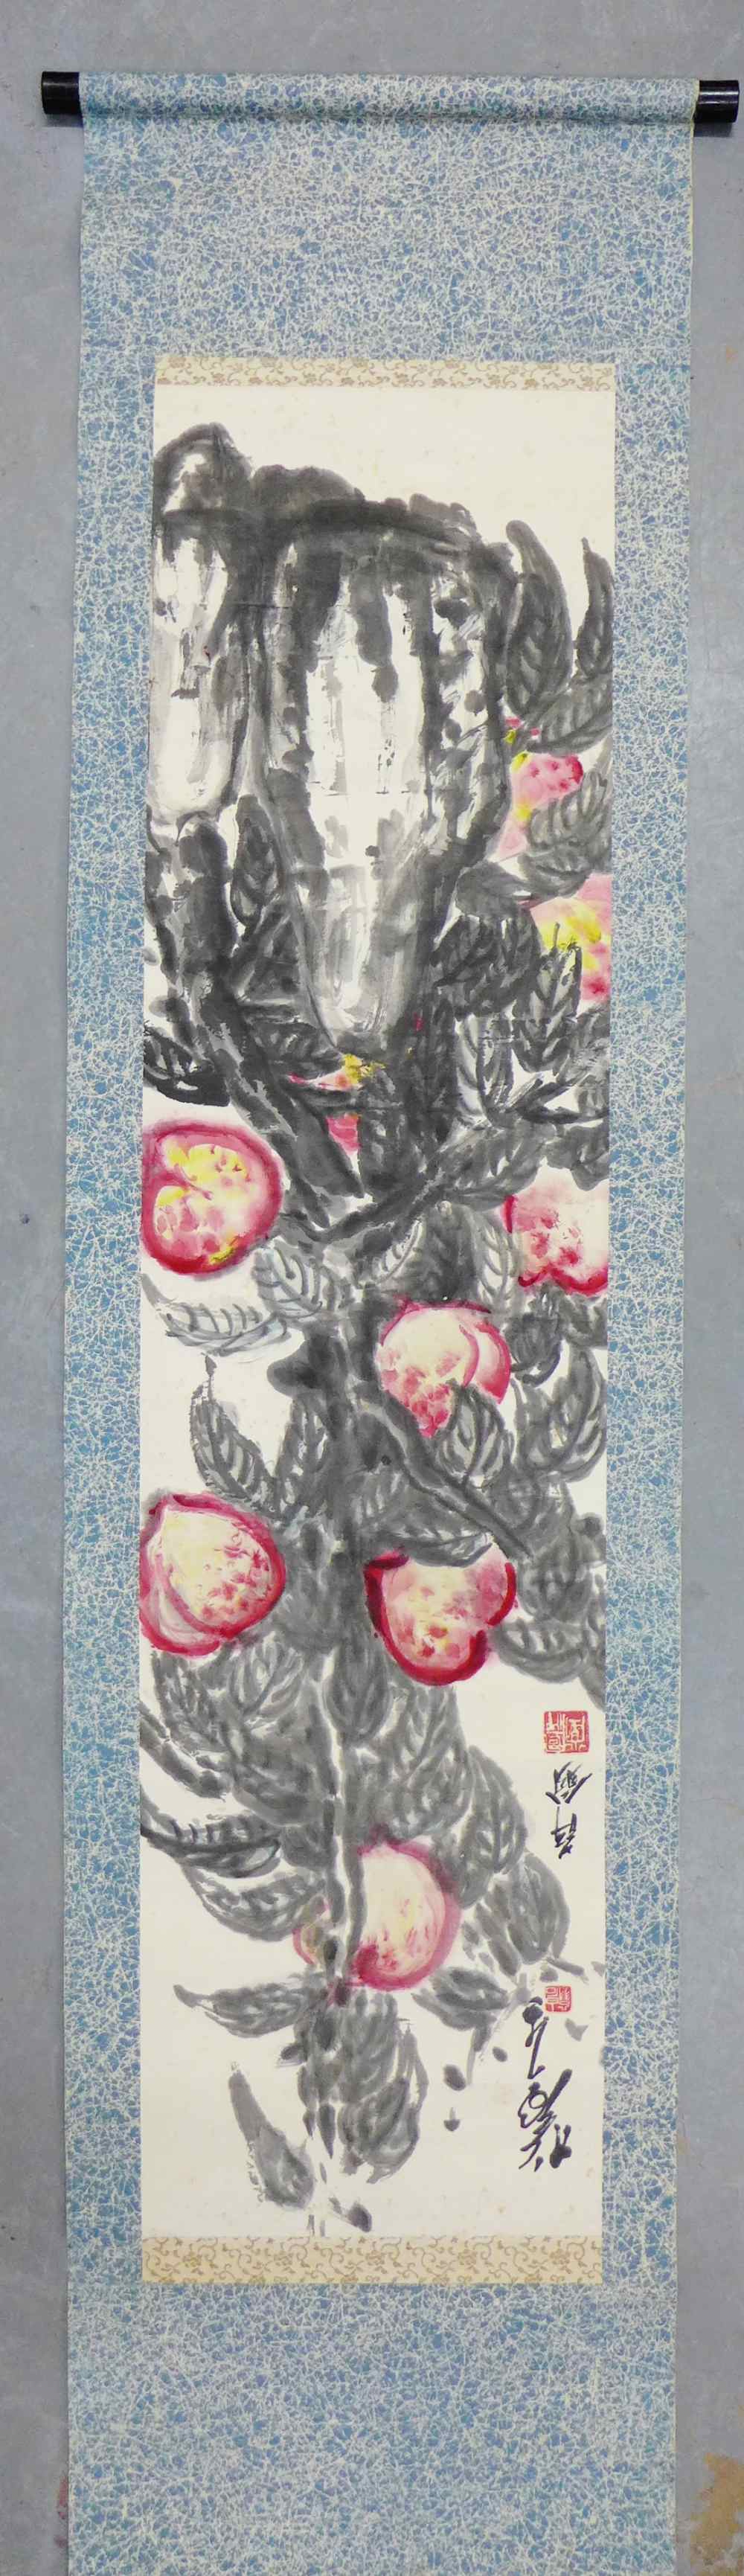 'Peaches' ink and watercolour on paper scroll, signed Ping Weng, with two seals Bai Shi Weng and